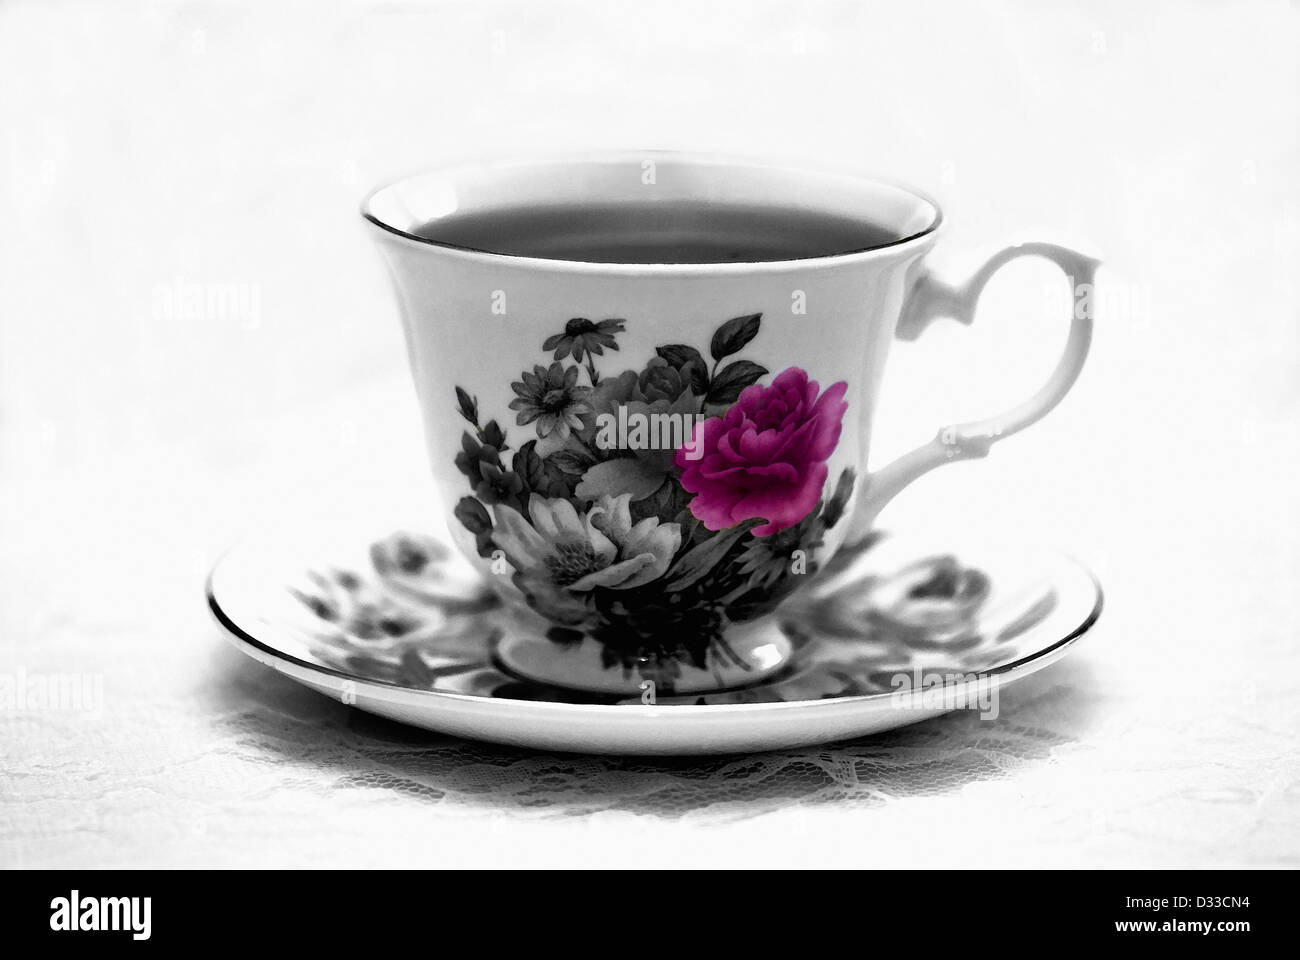 A cup of coffee in a china floral cup and saucer, resting on a lace tablecloth. Selective color. Conceptual image. Stock Photo